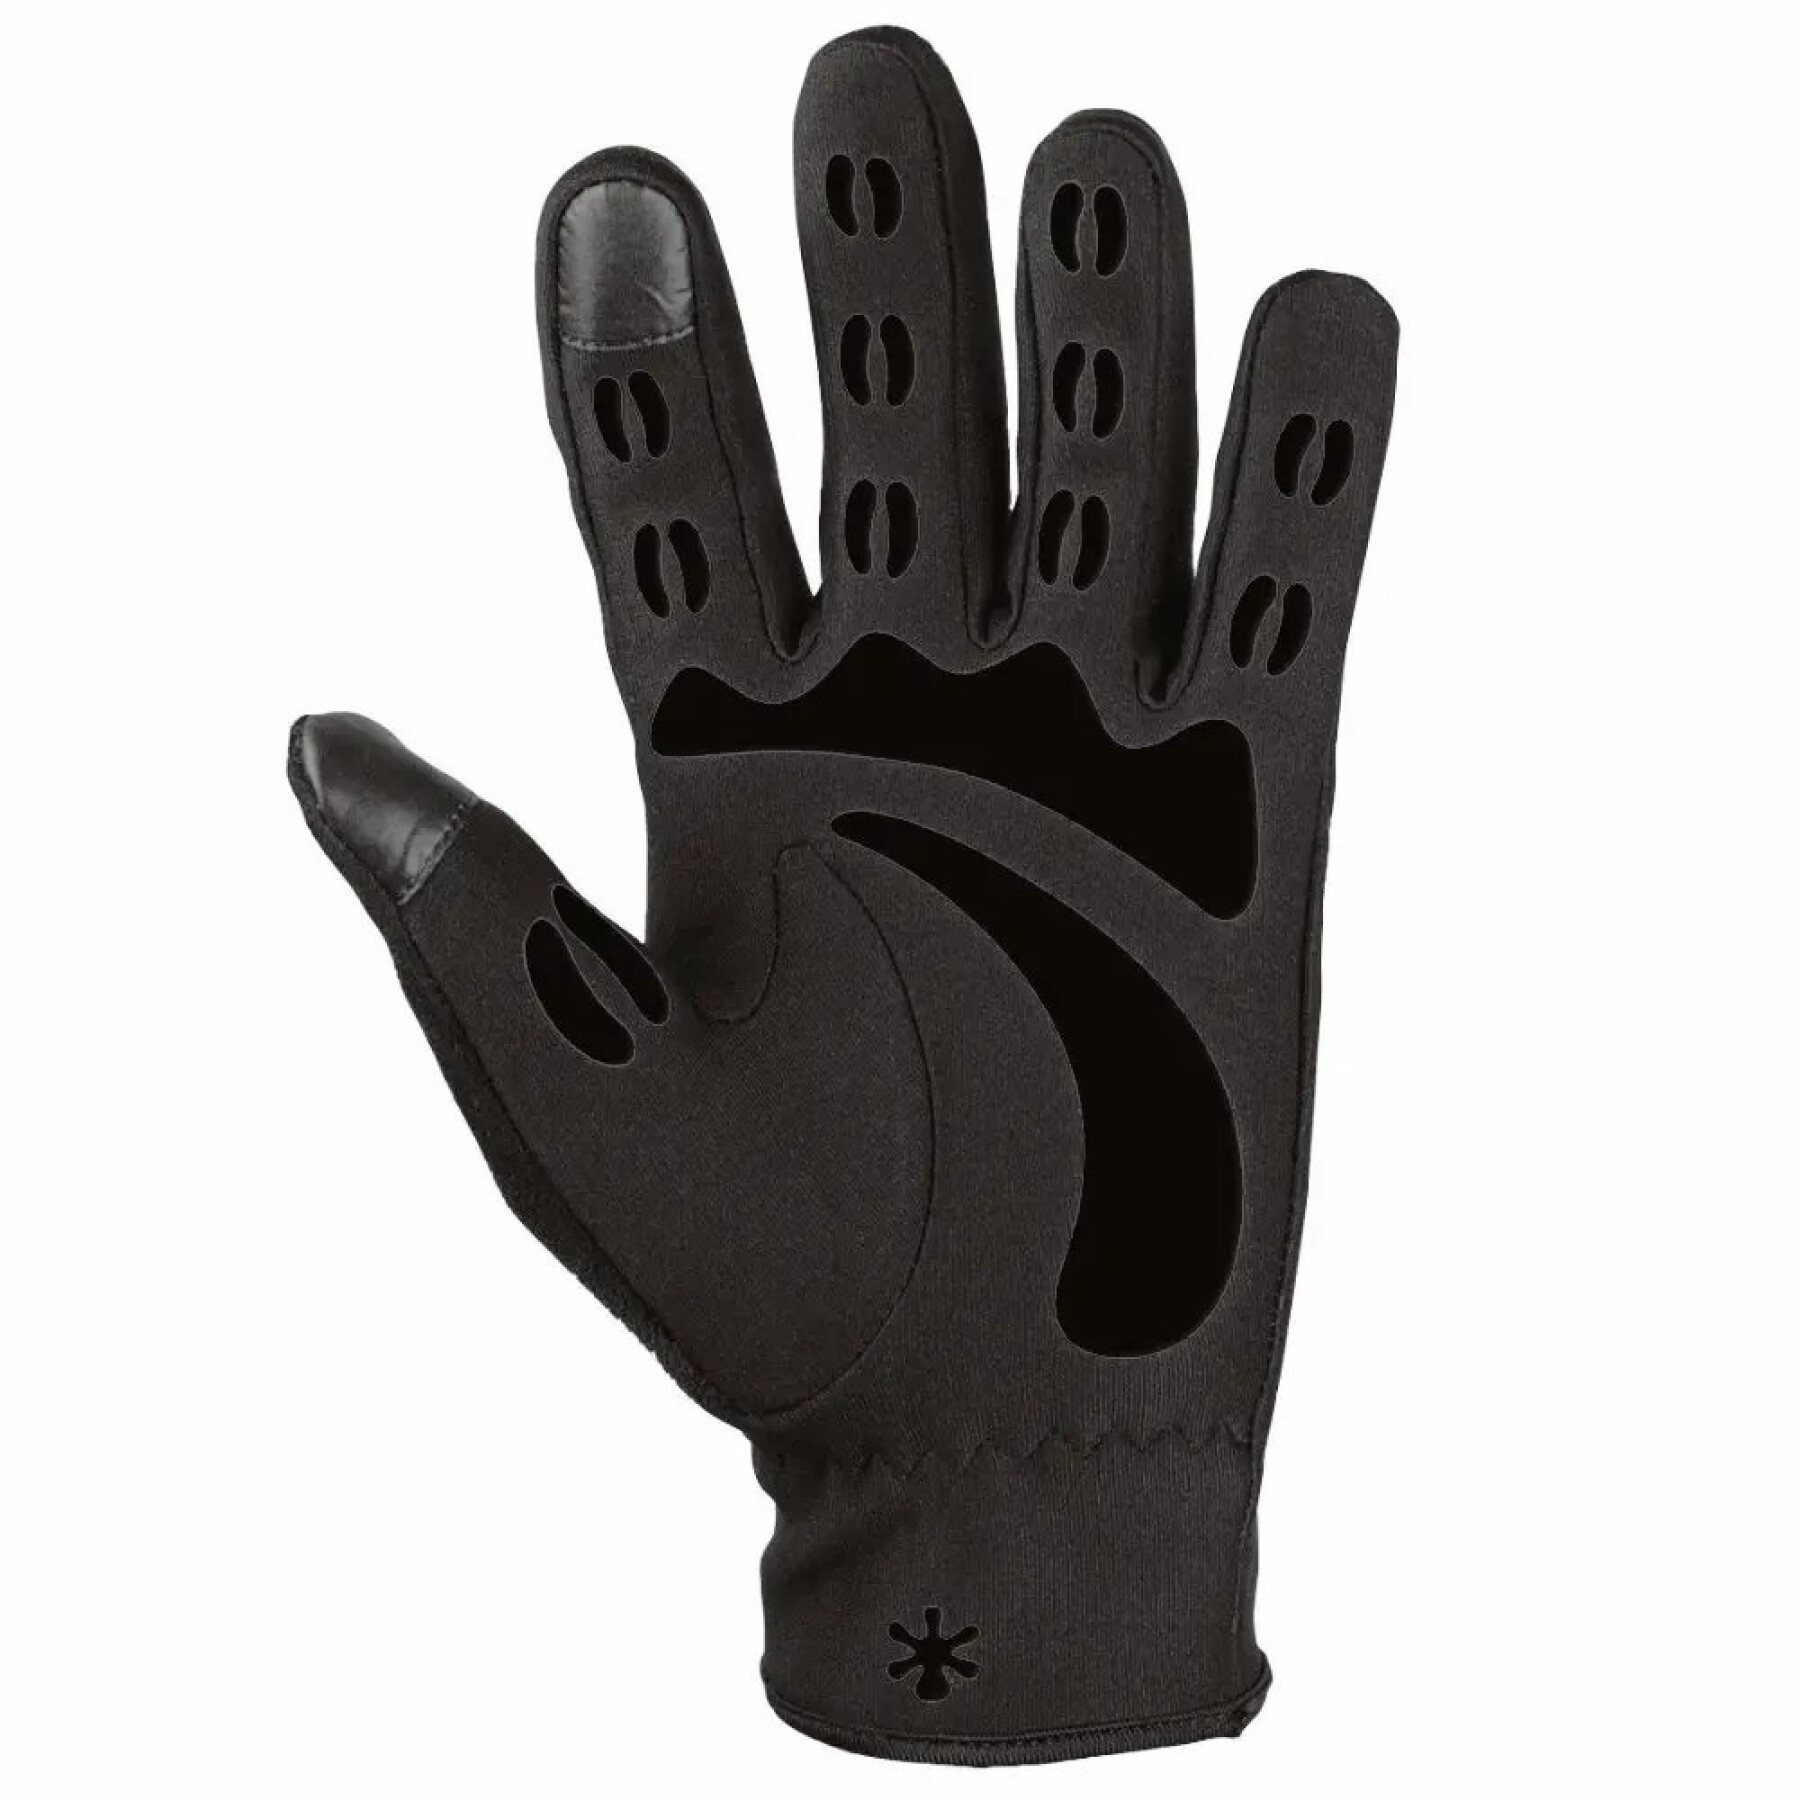 Handschuhe Hirzl Chilly (x2)